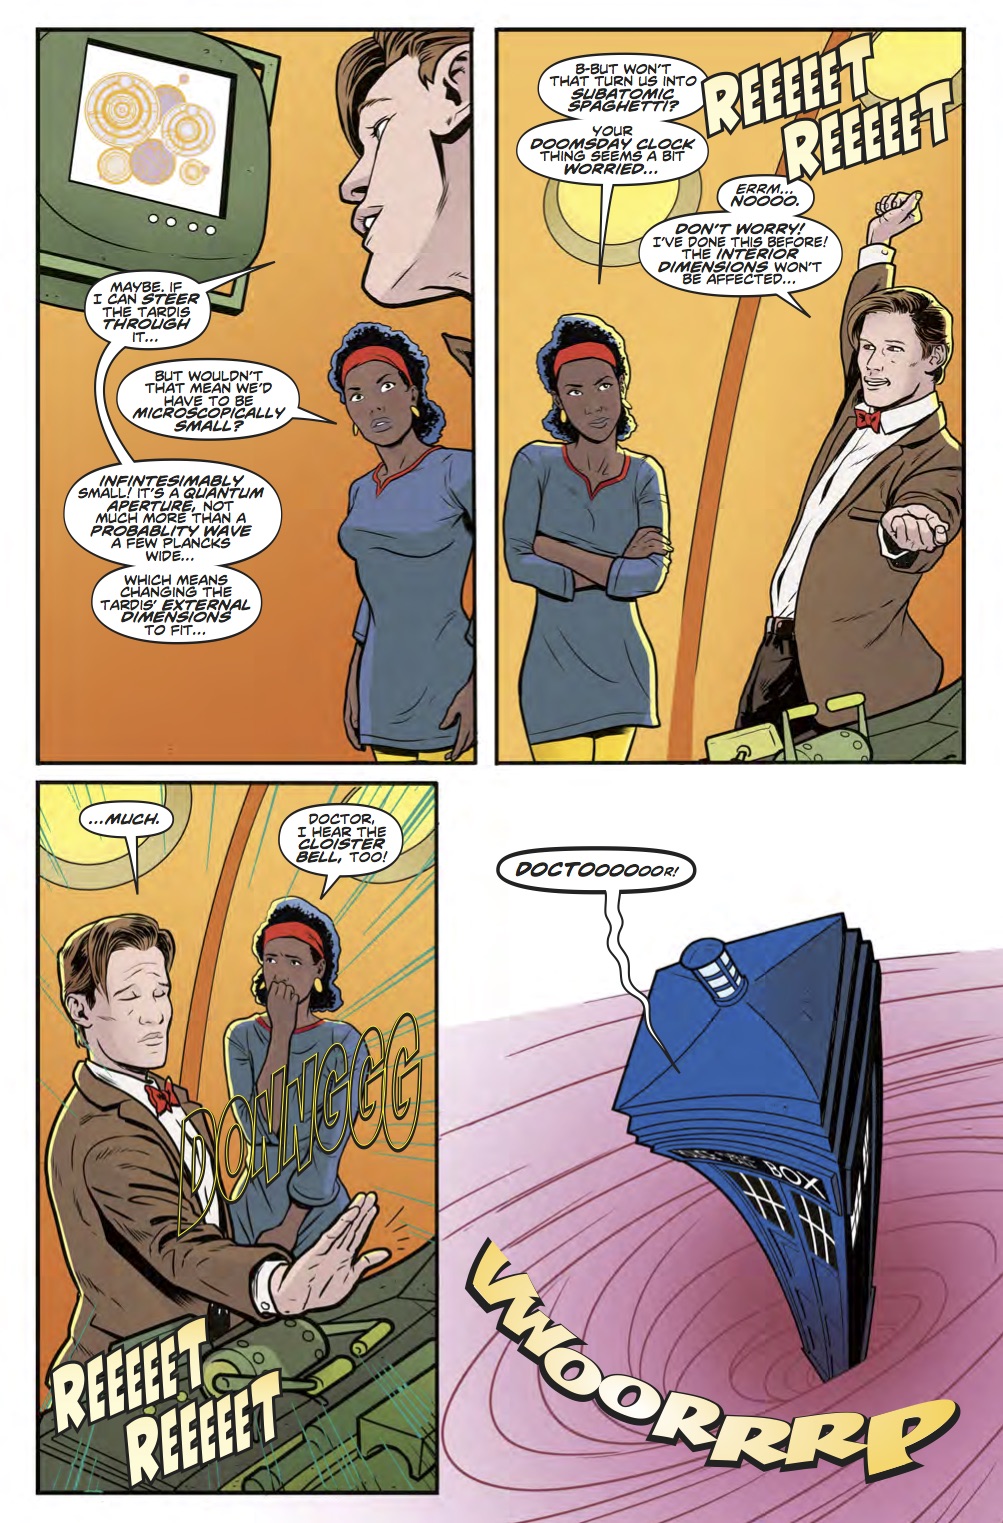 Doctor_Who_11D_3_10_Page 2